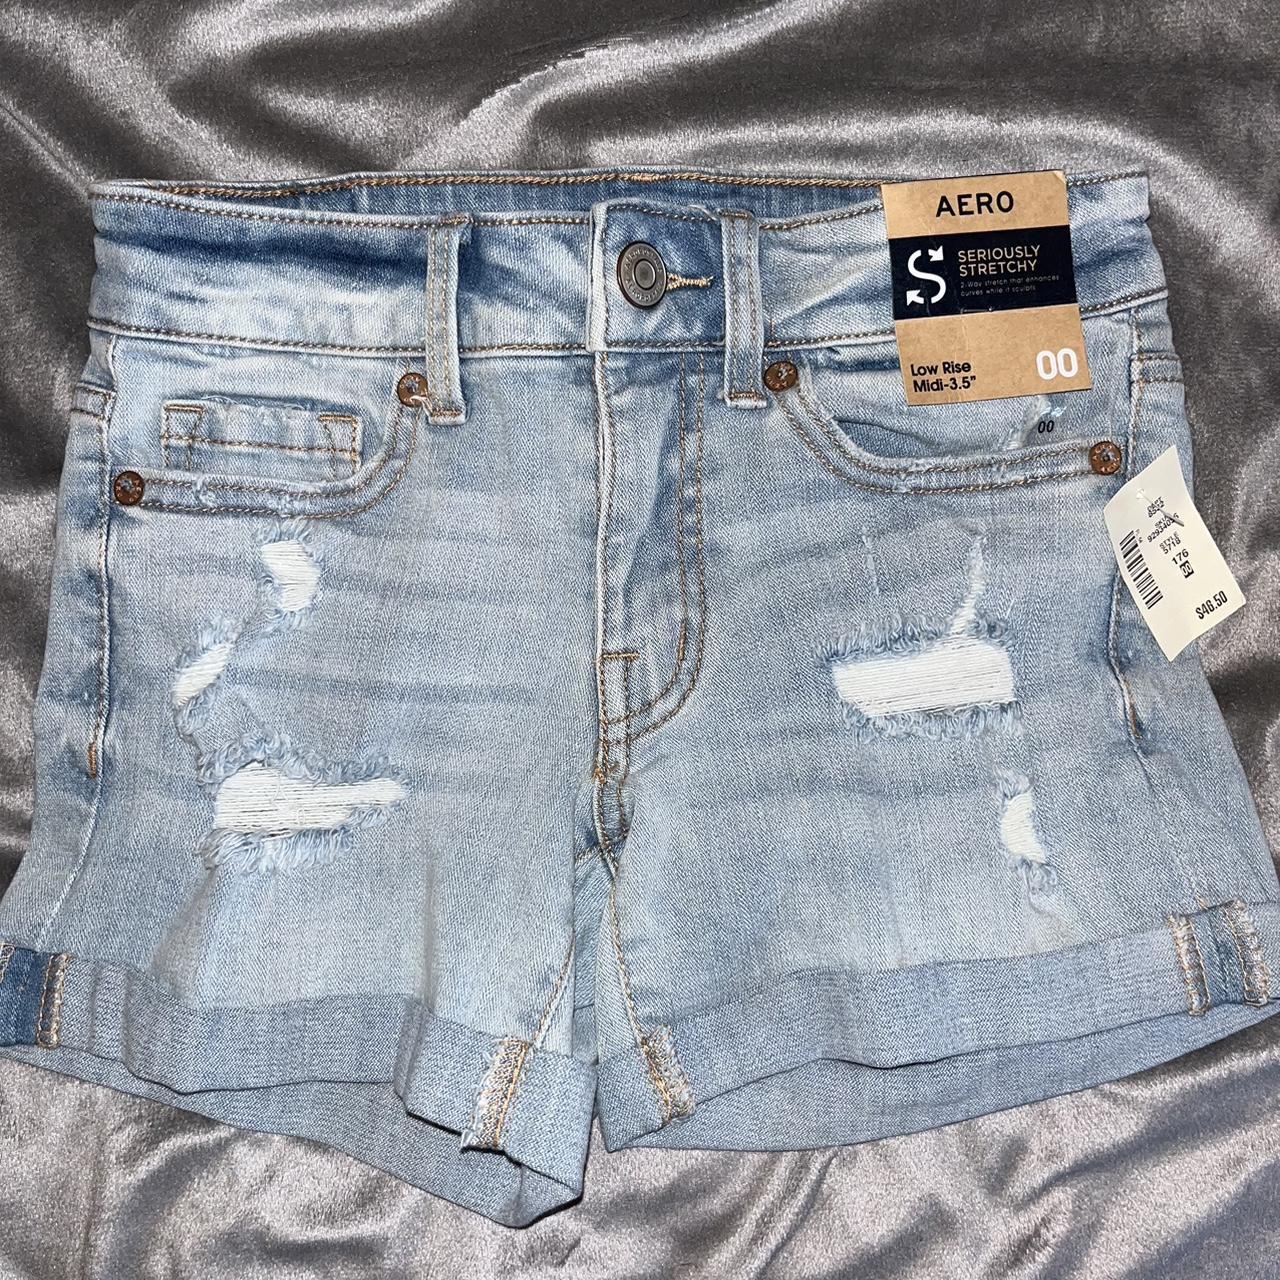 Aeropostale Seriously Stretchy Women Low-Rise Light - Depop